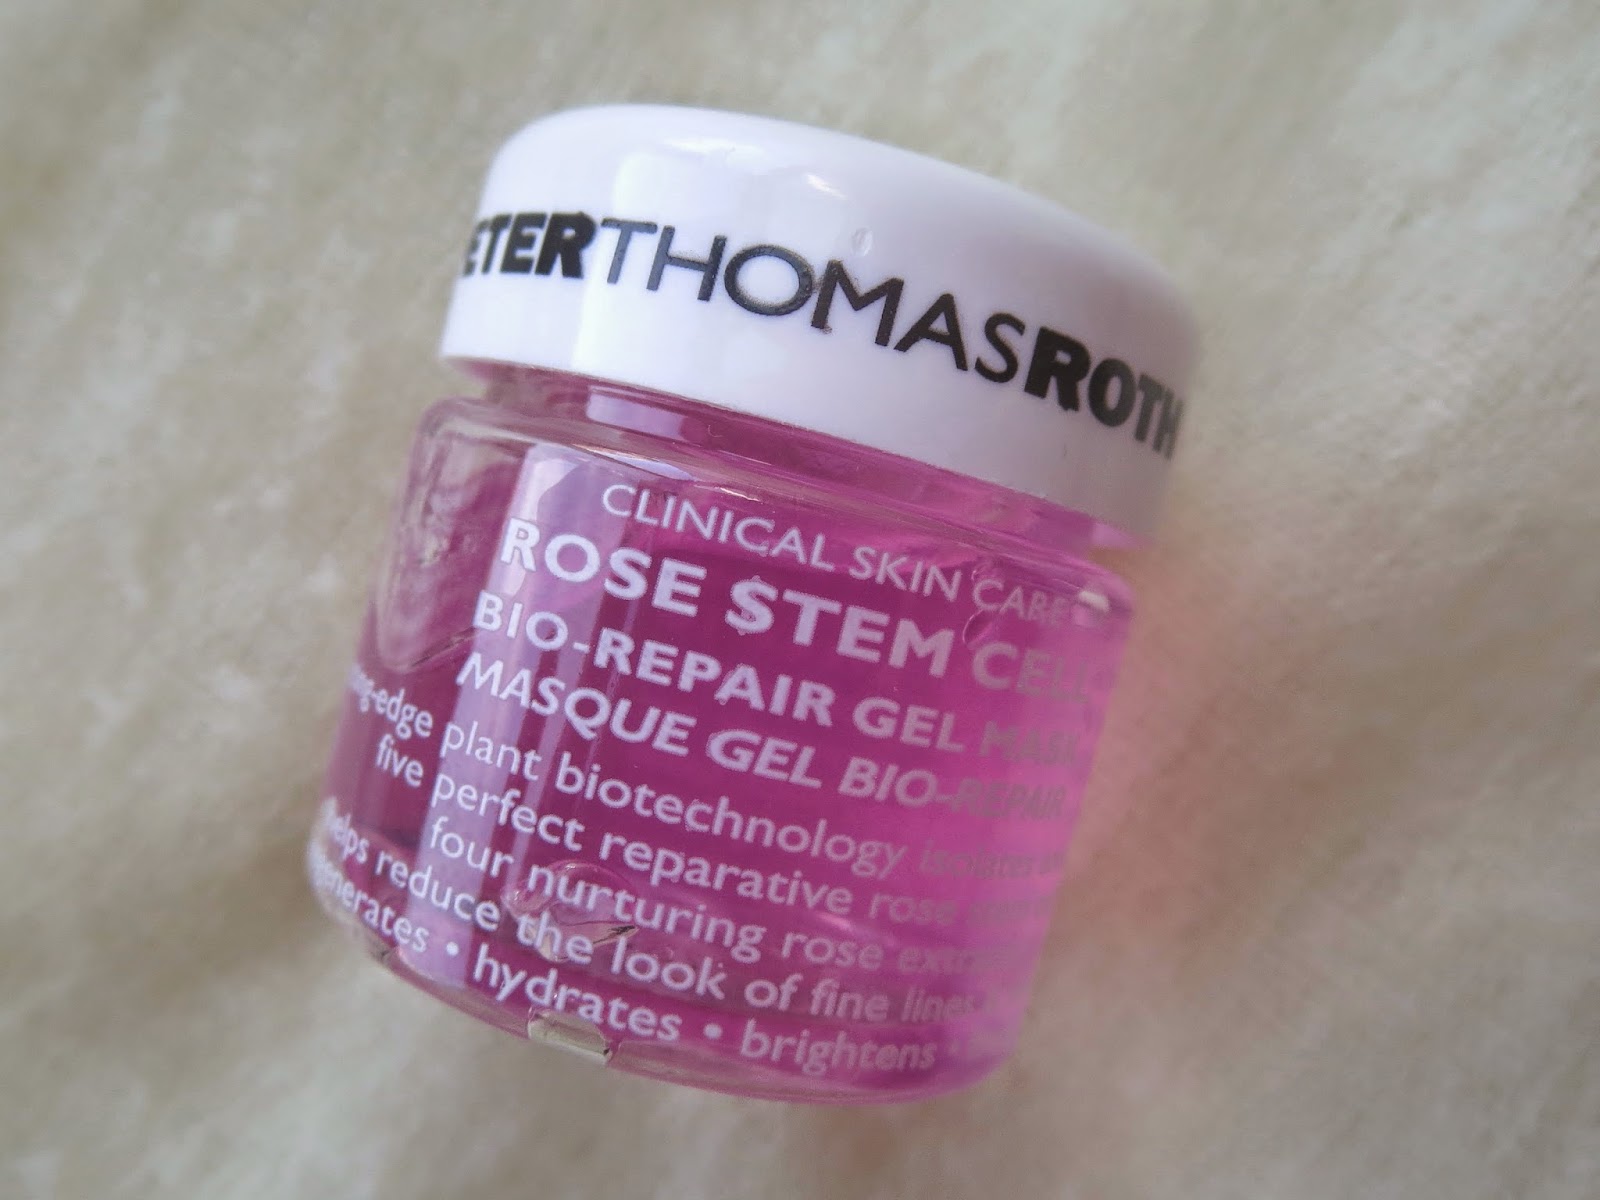 a picture of Peter Thomas Roth Rose Stem Cell Bio-Repair Gel Mask